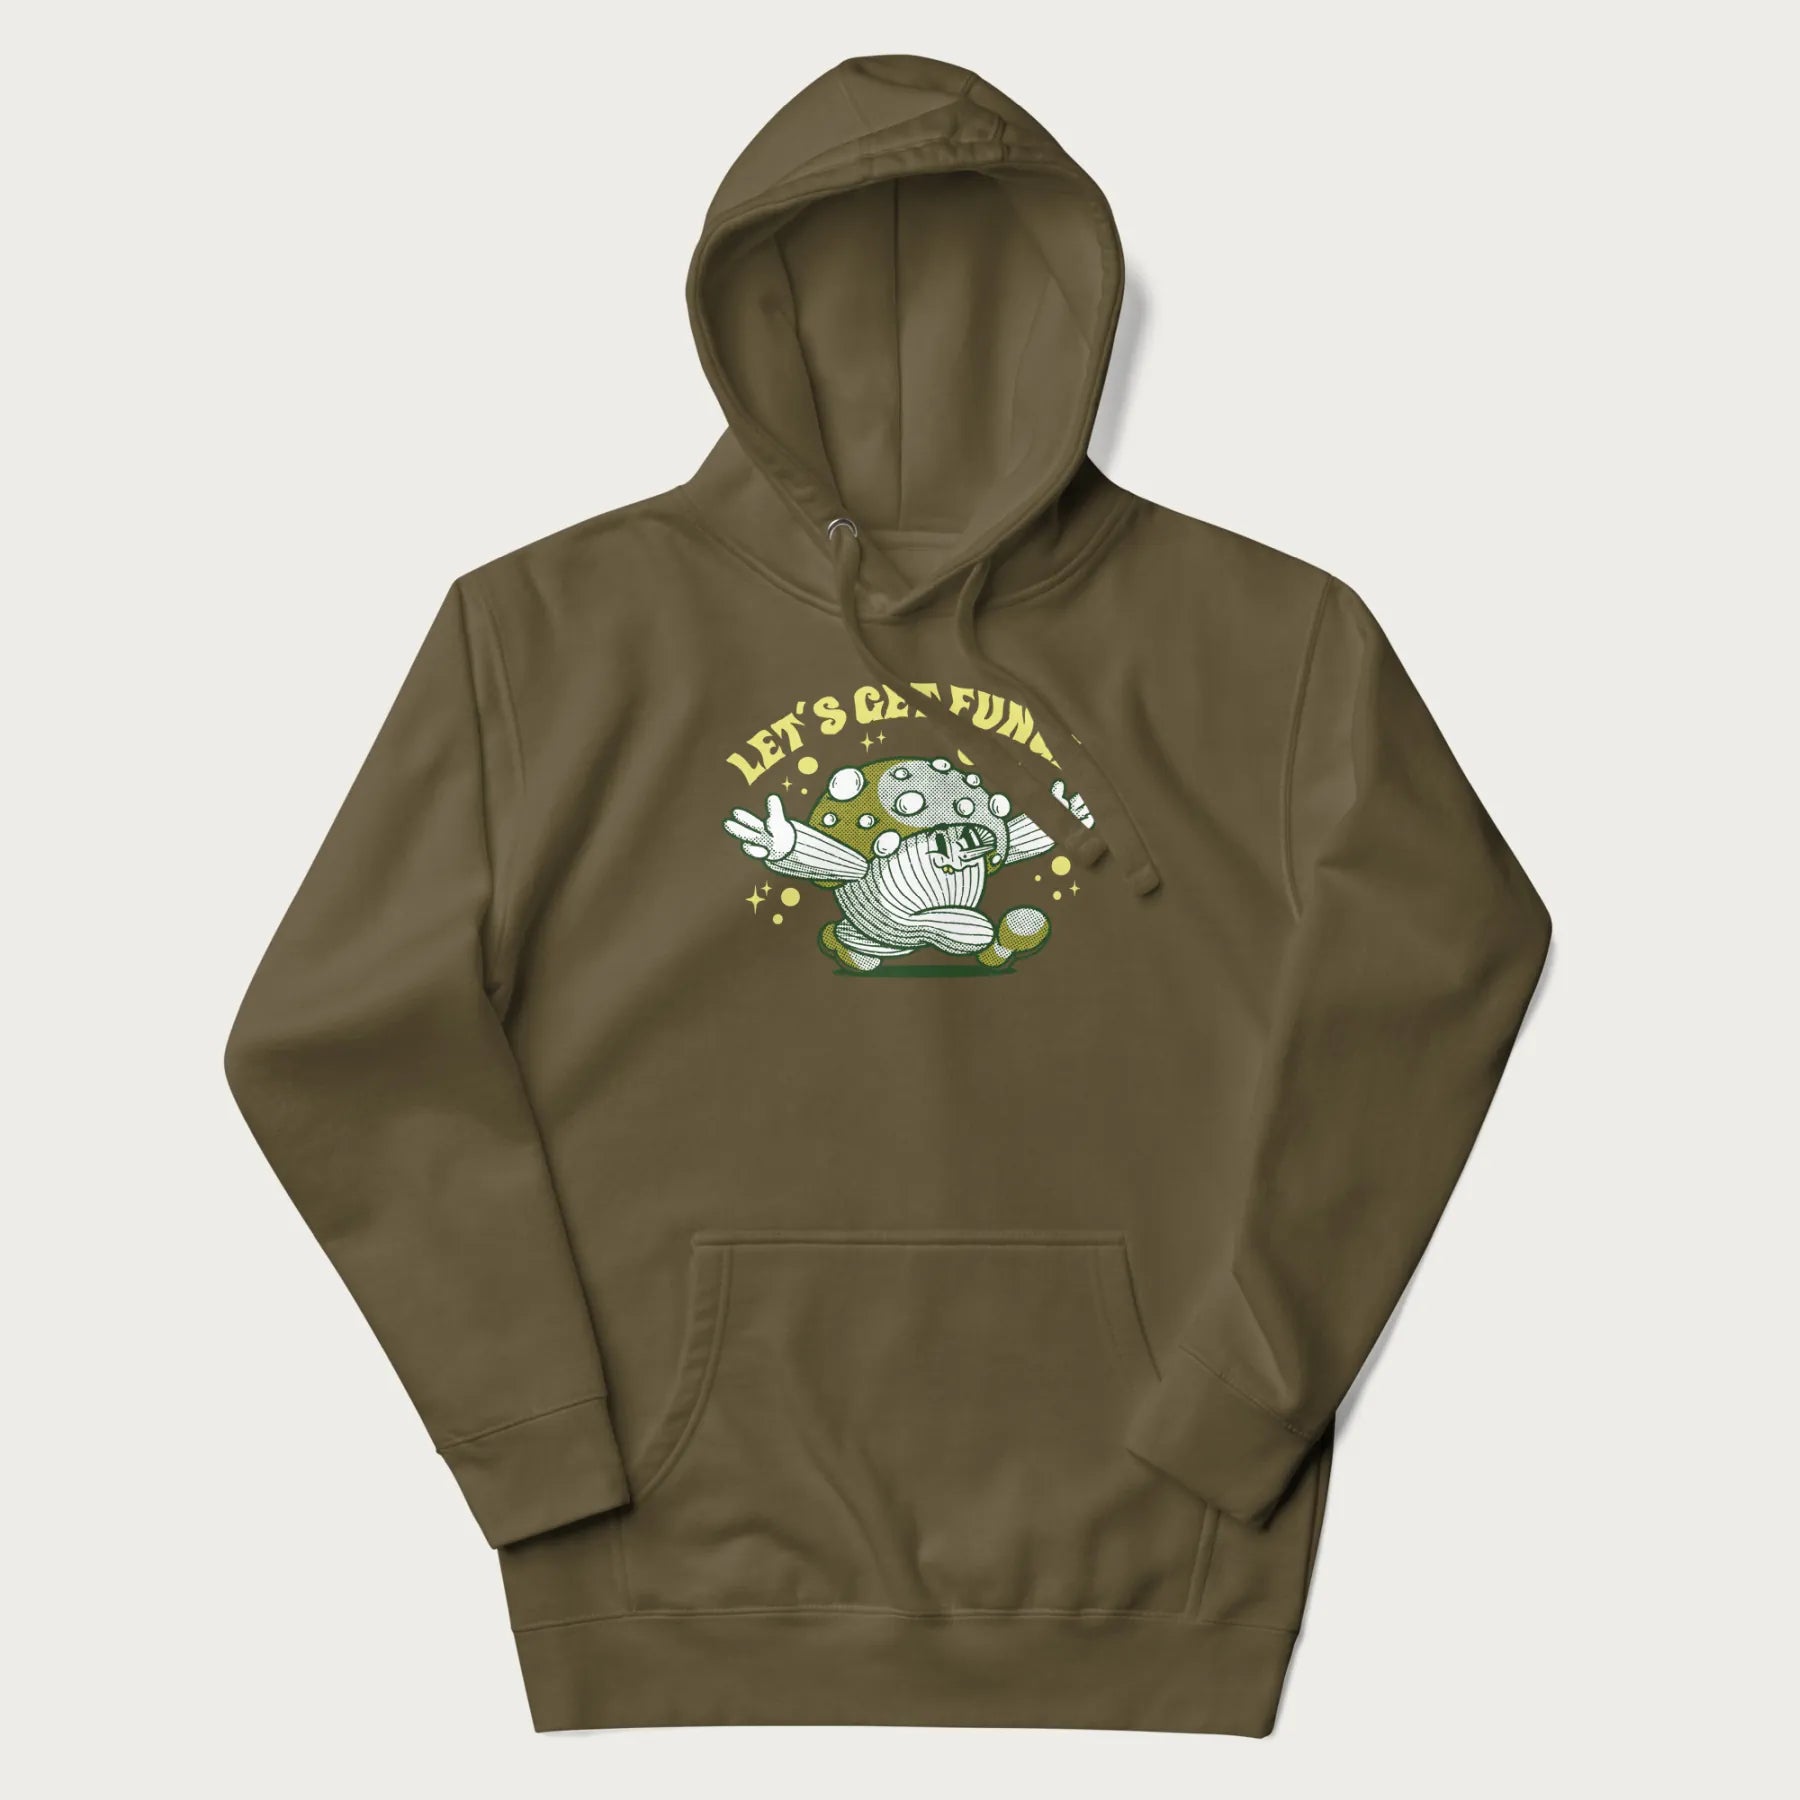 Military green hoodie with a retro-inspired graphic of a mushroom mascot character and the text 'Let's Get Fungi'.